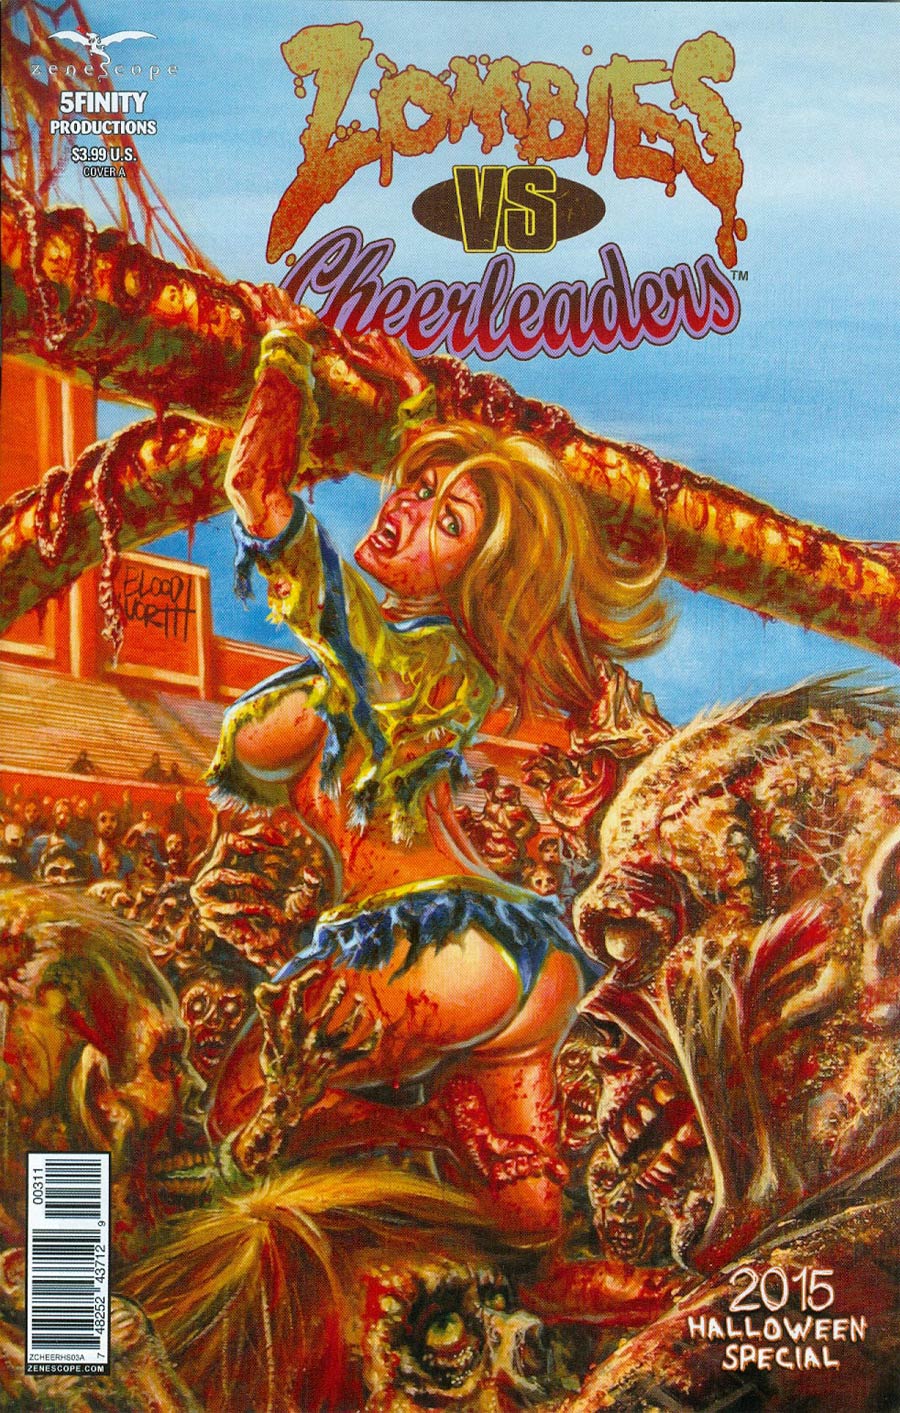 Zombies vs Cheerleaders Halloween Special 2015 #1 Cover A Mark Bloodworth